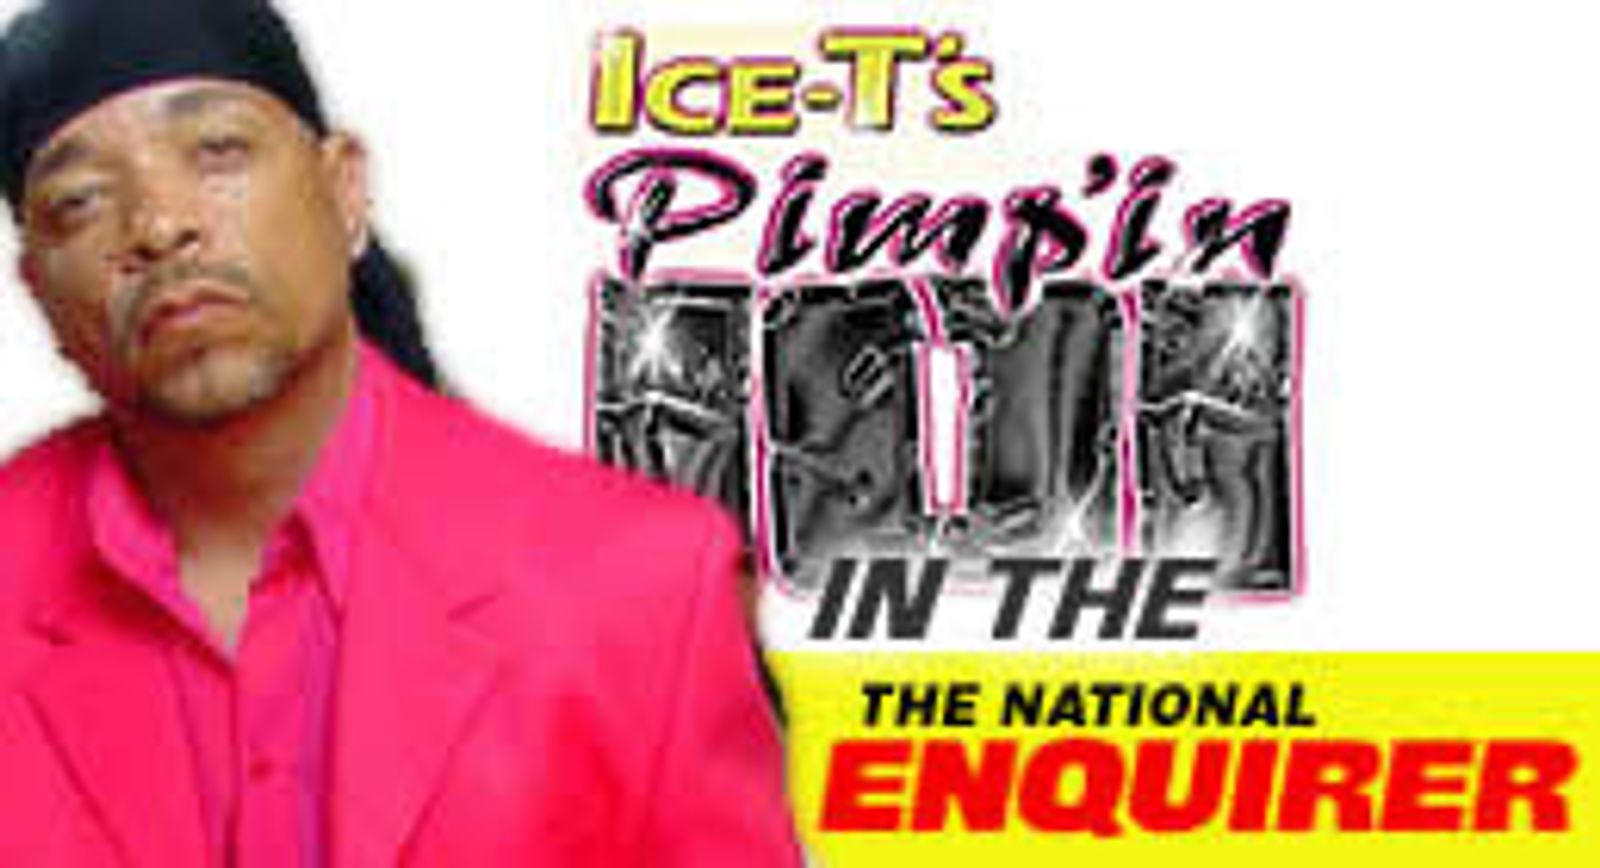 <I>Ice-T's Pimpin' 101</I> Covered By <I>The National Enquirer</I> Just in Time For Street Date